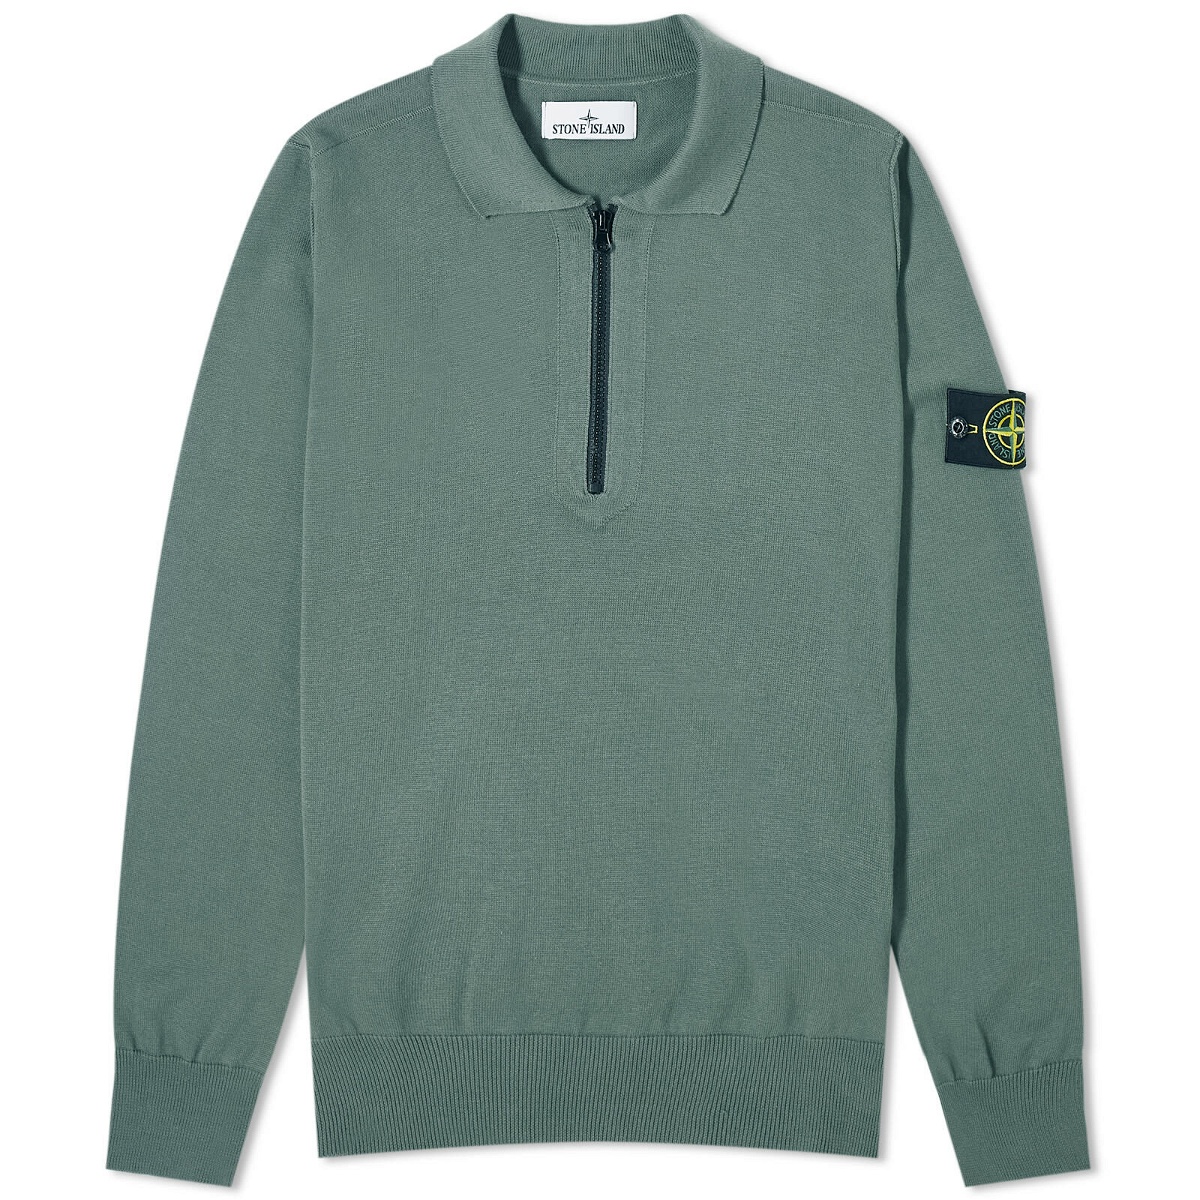 Photo: Stone Island Men's Soft Cotton Long Sleeve Knitted Polo Shirt in Musk